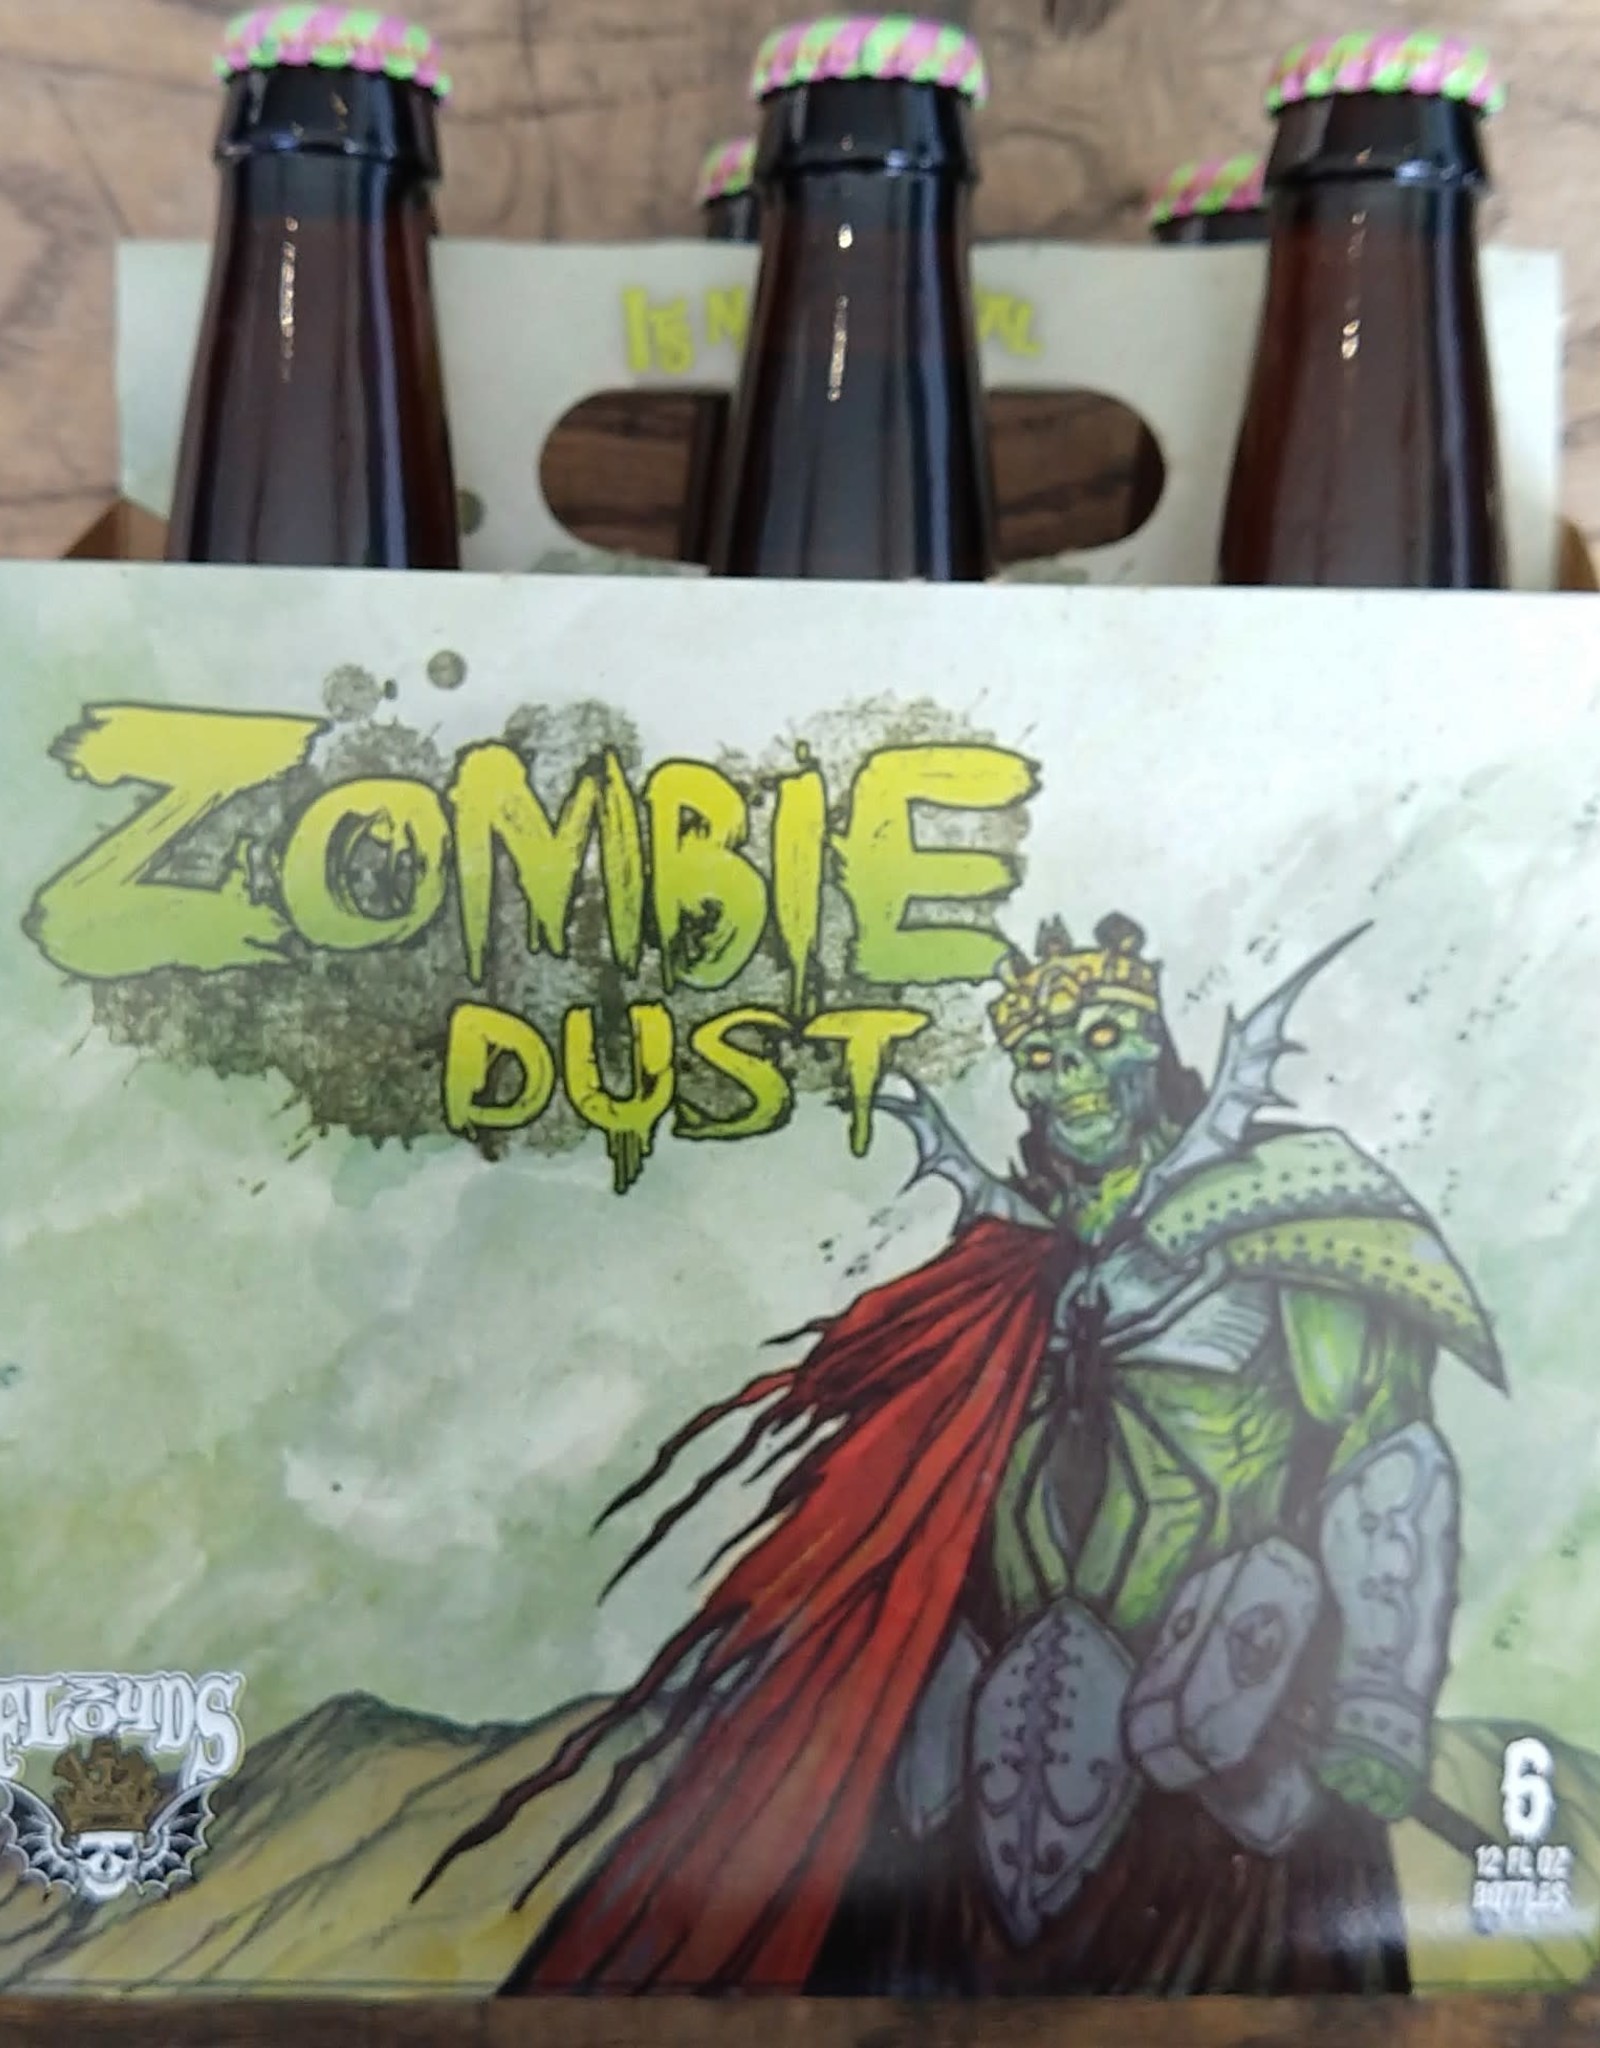 3 Floyds 6 PACK 3 Floyds Zombie Dust